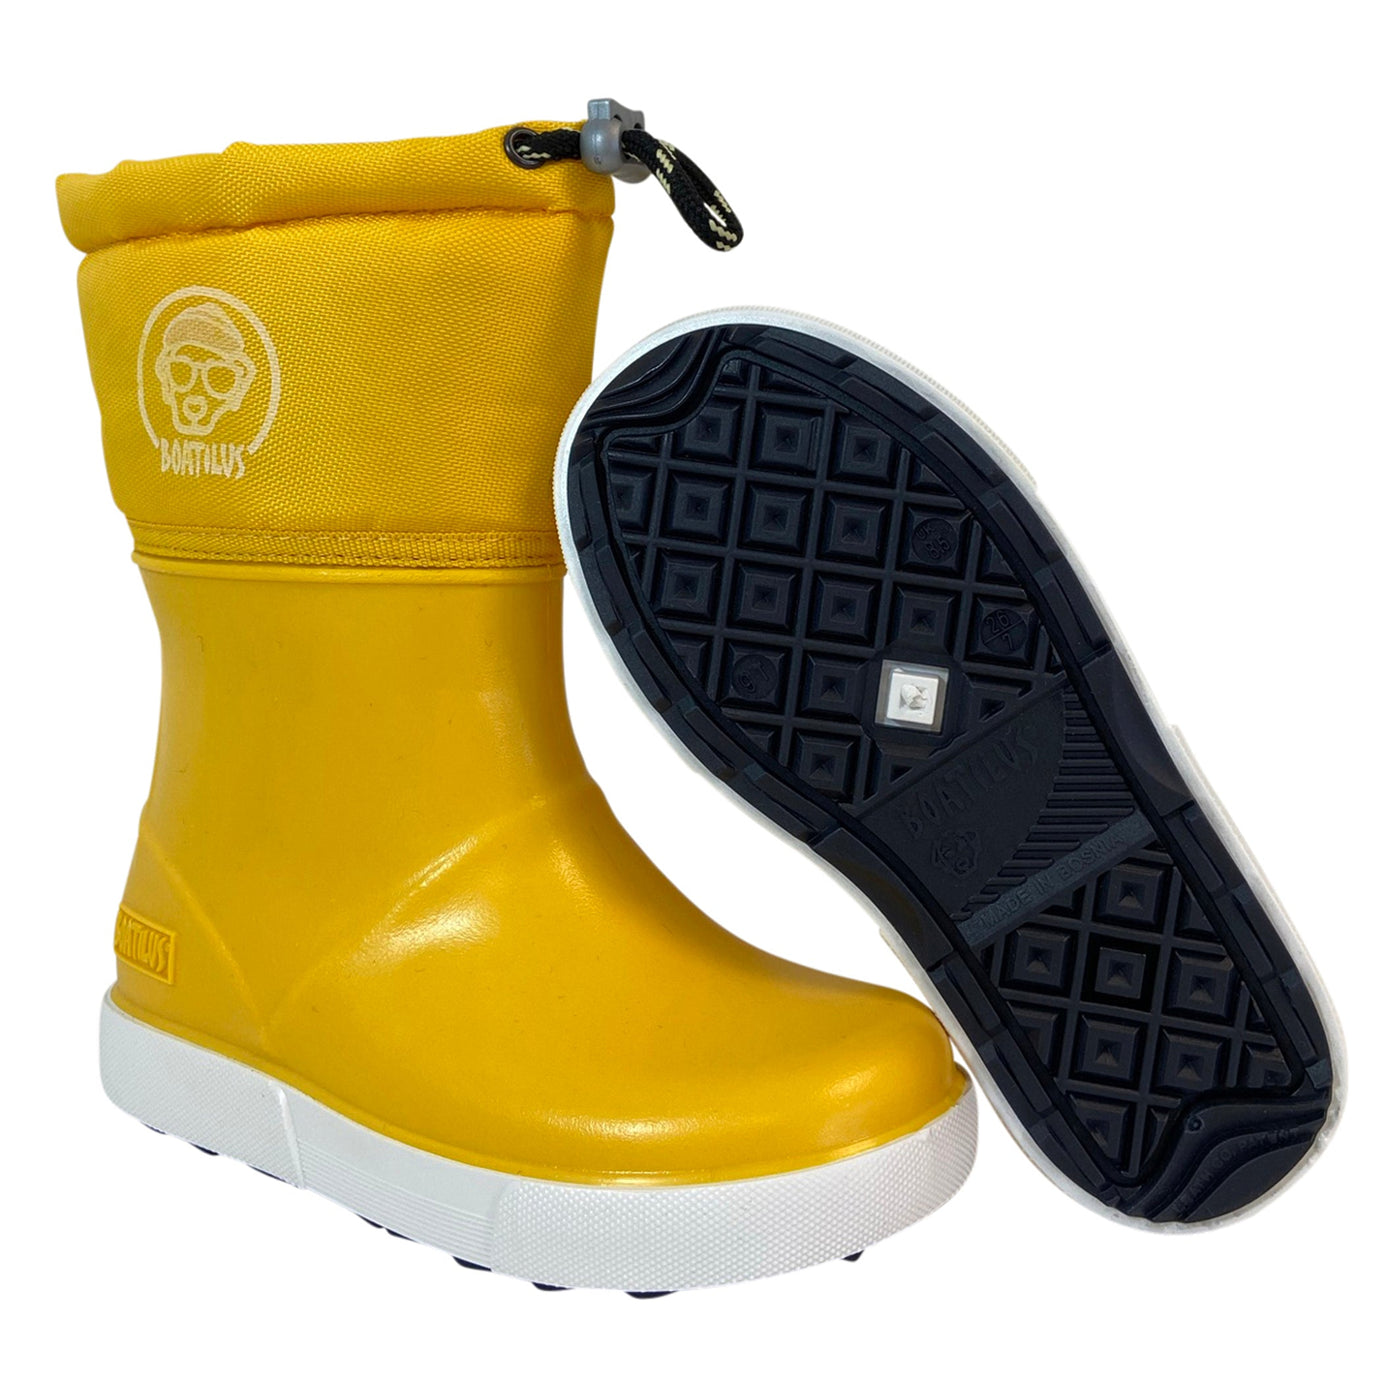 Boatilus Penguy B Warm Welly Boot Yellow